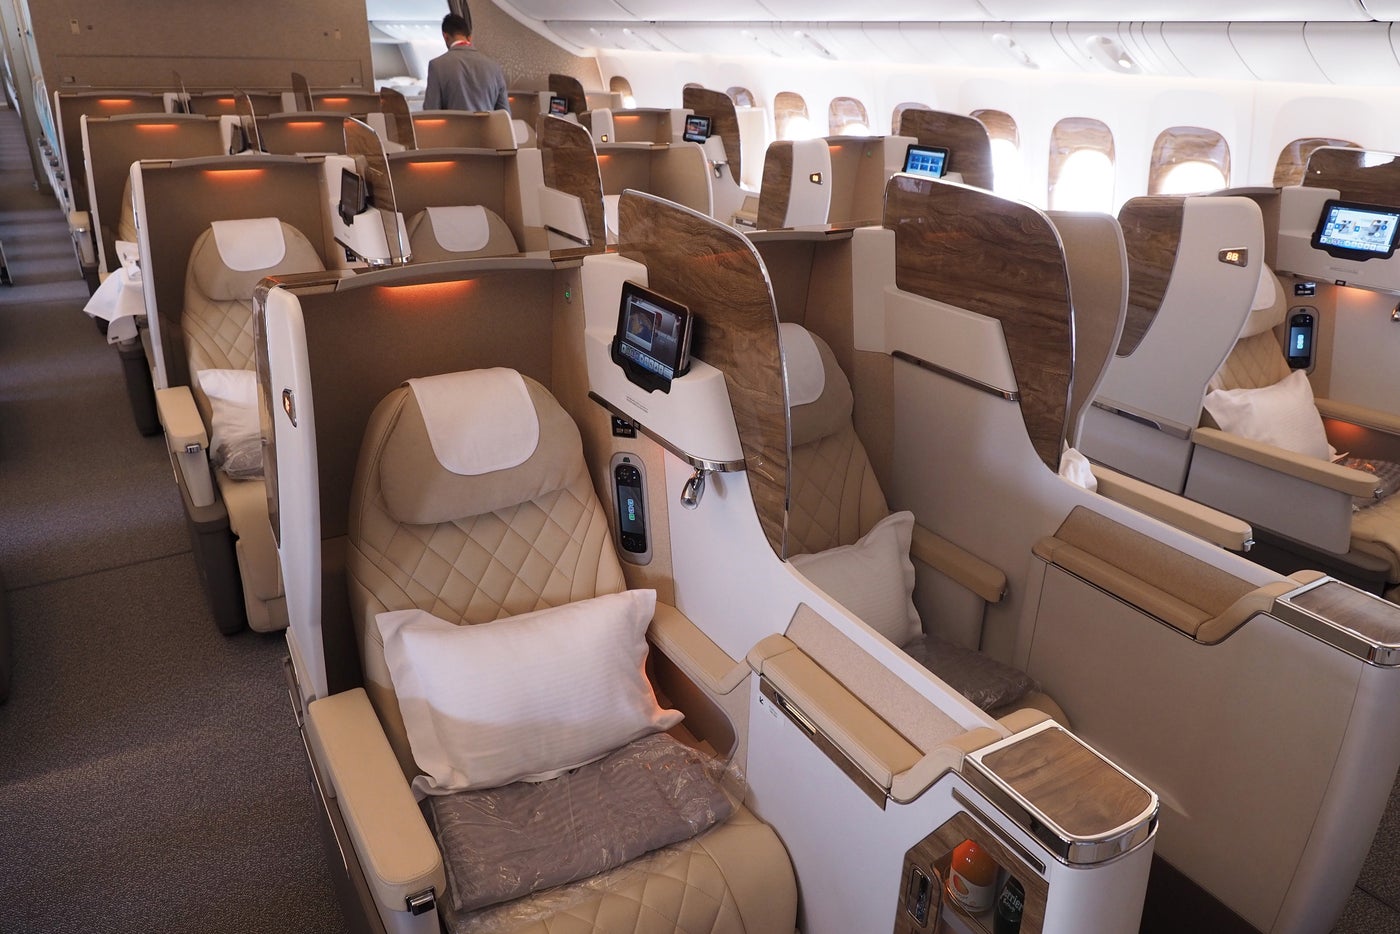 Emirates Fancy New Business Class Still Has Middle Seats 2419